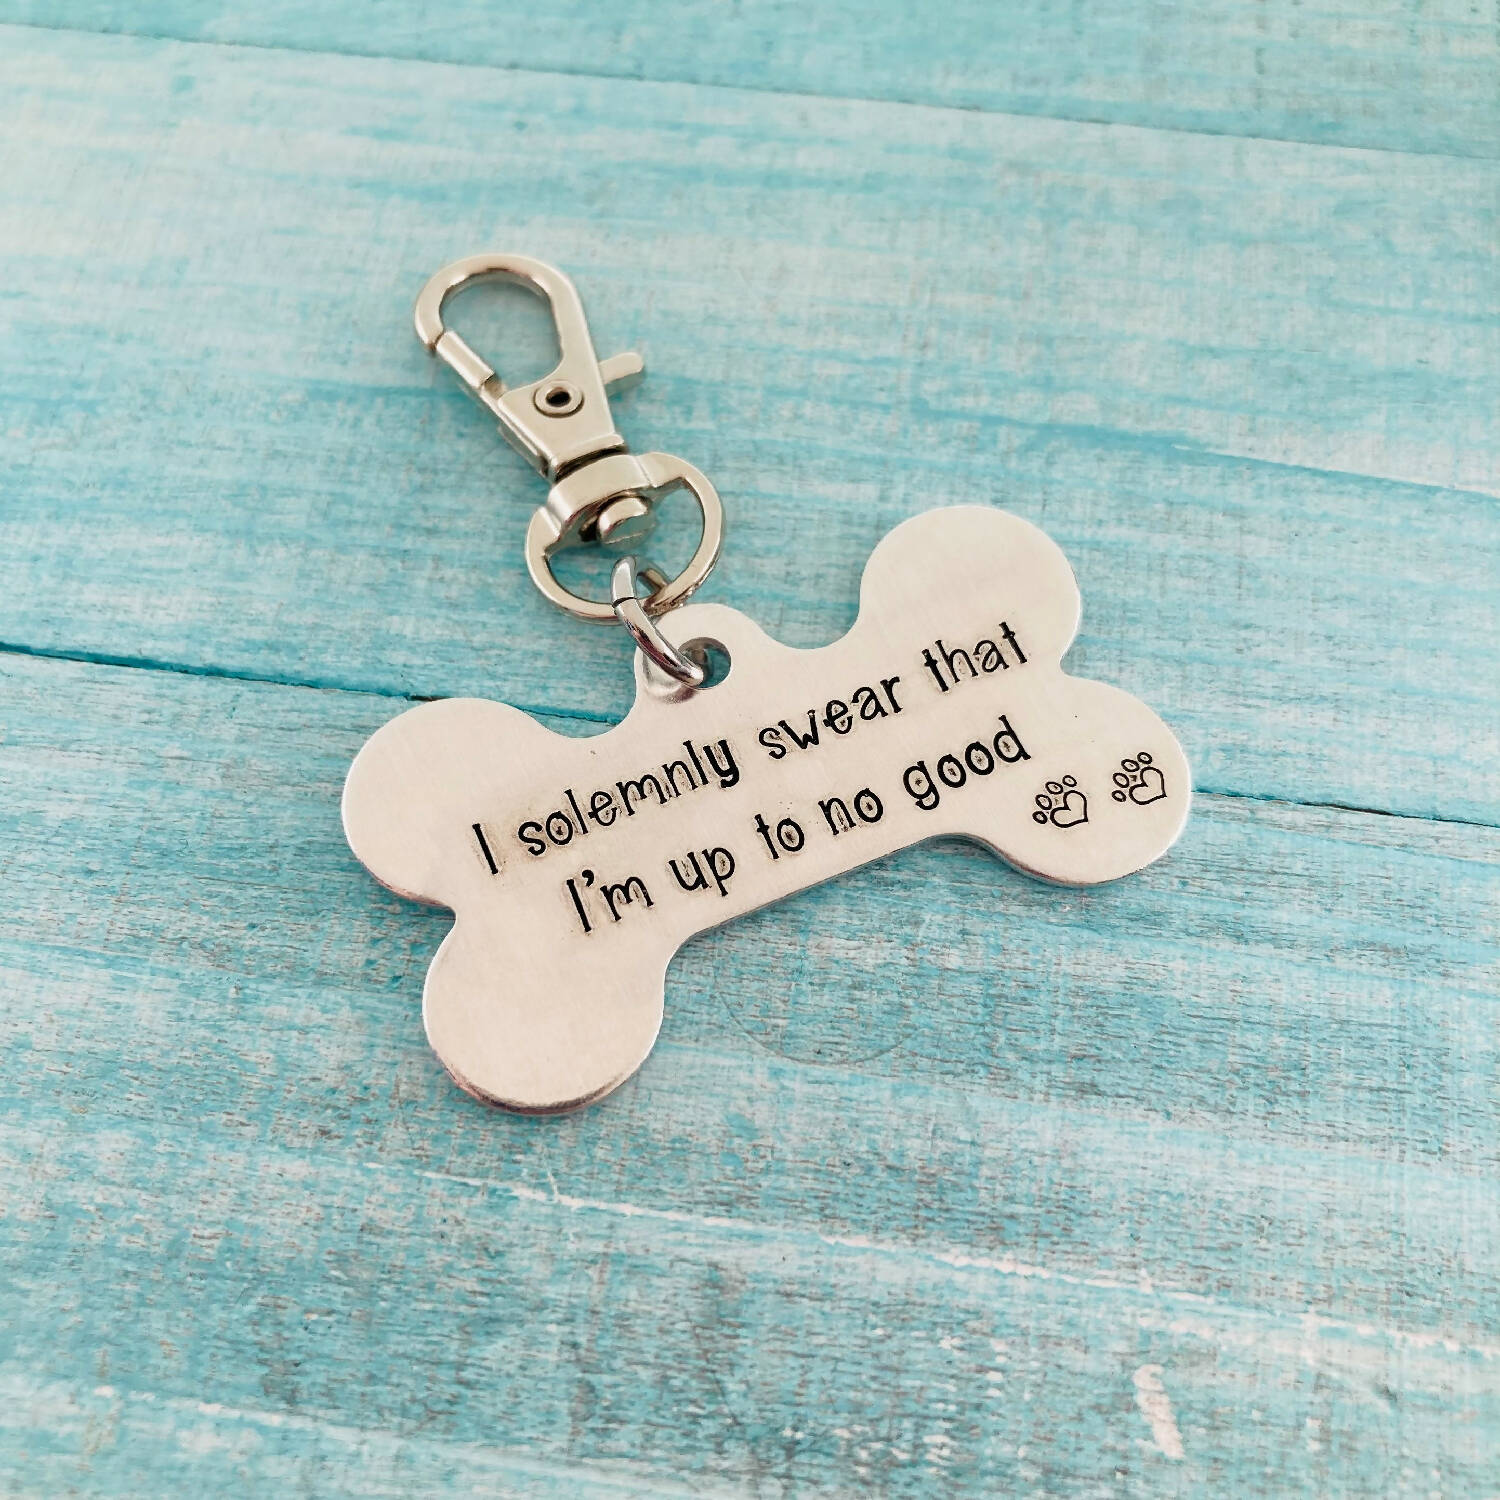 Pet tag - I solemnly swear that I'm up to no good